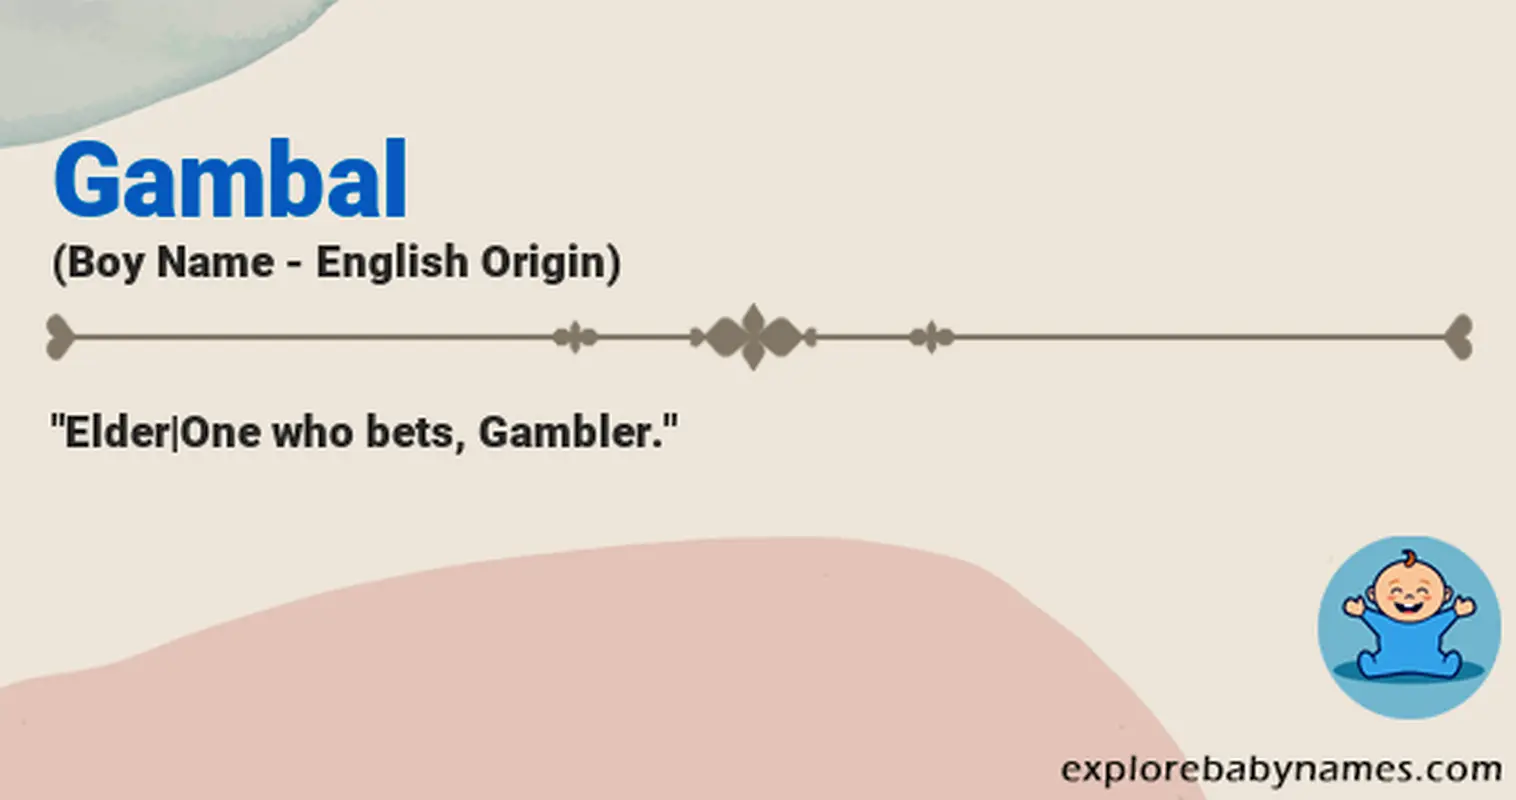 Meaning of Gambal